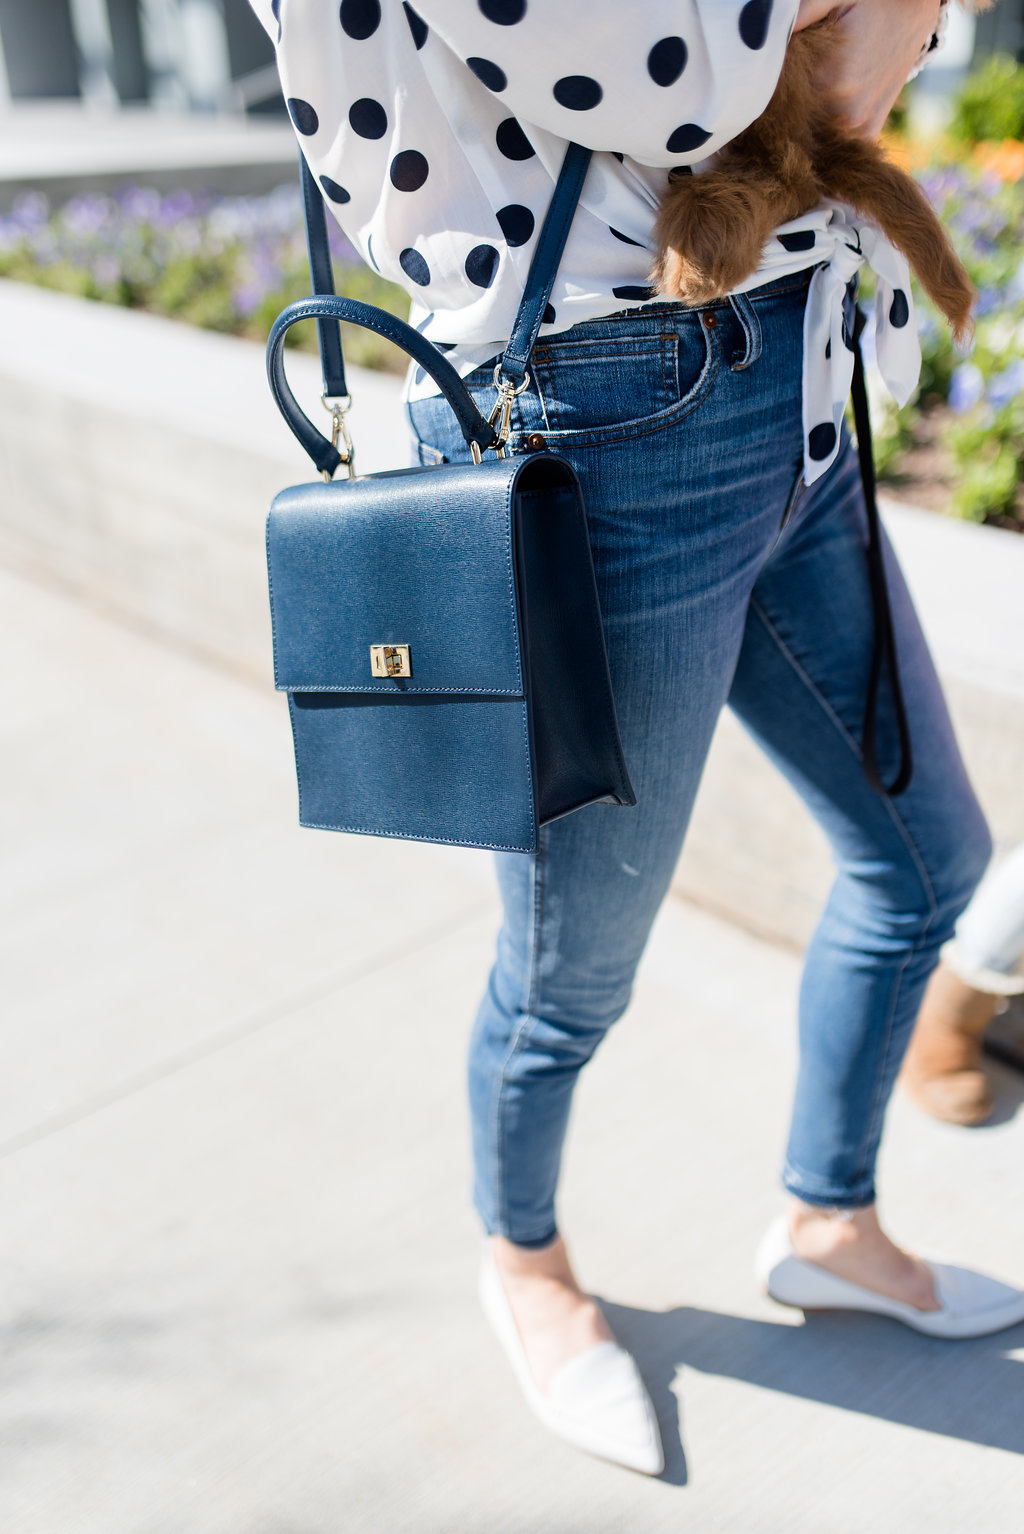 navy cross body bag with jeans and polka dot top